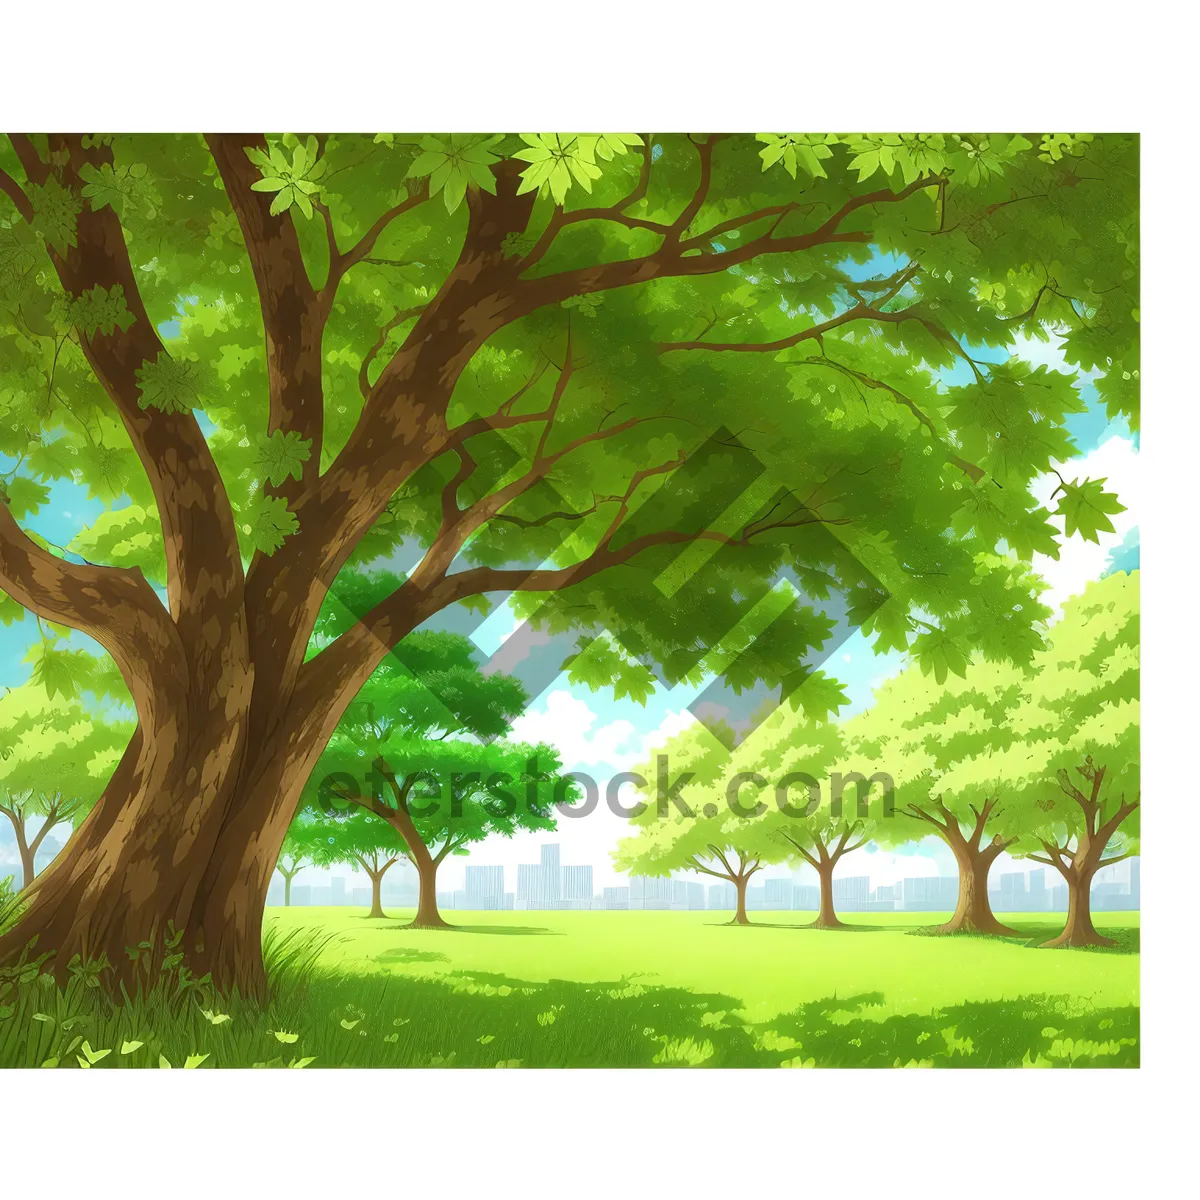 Picture of Serene Summer Forest Landscape with Majestic Oak Tree